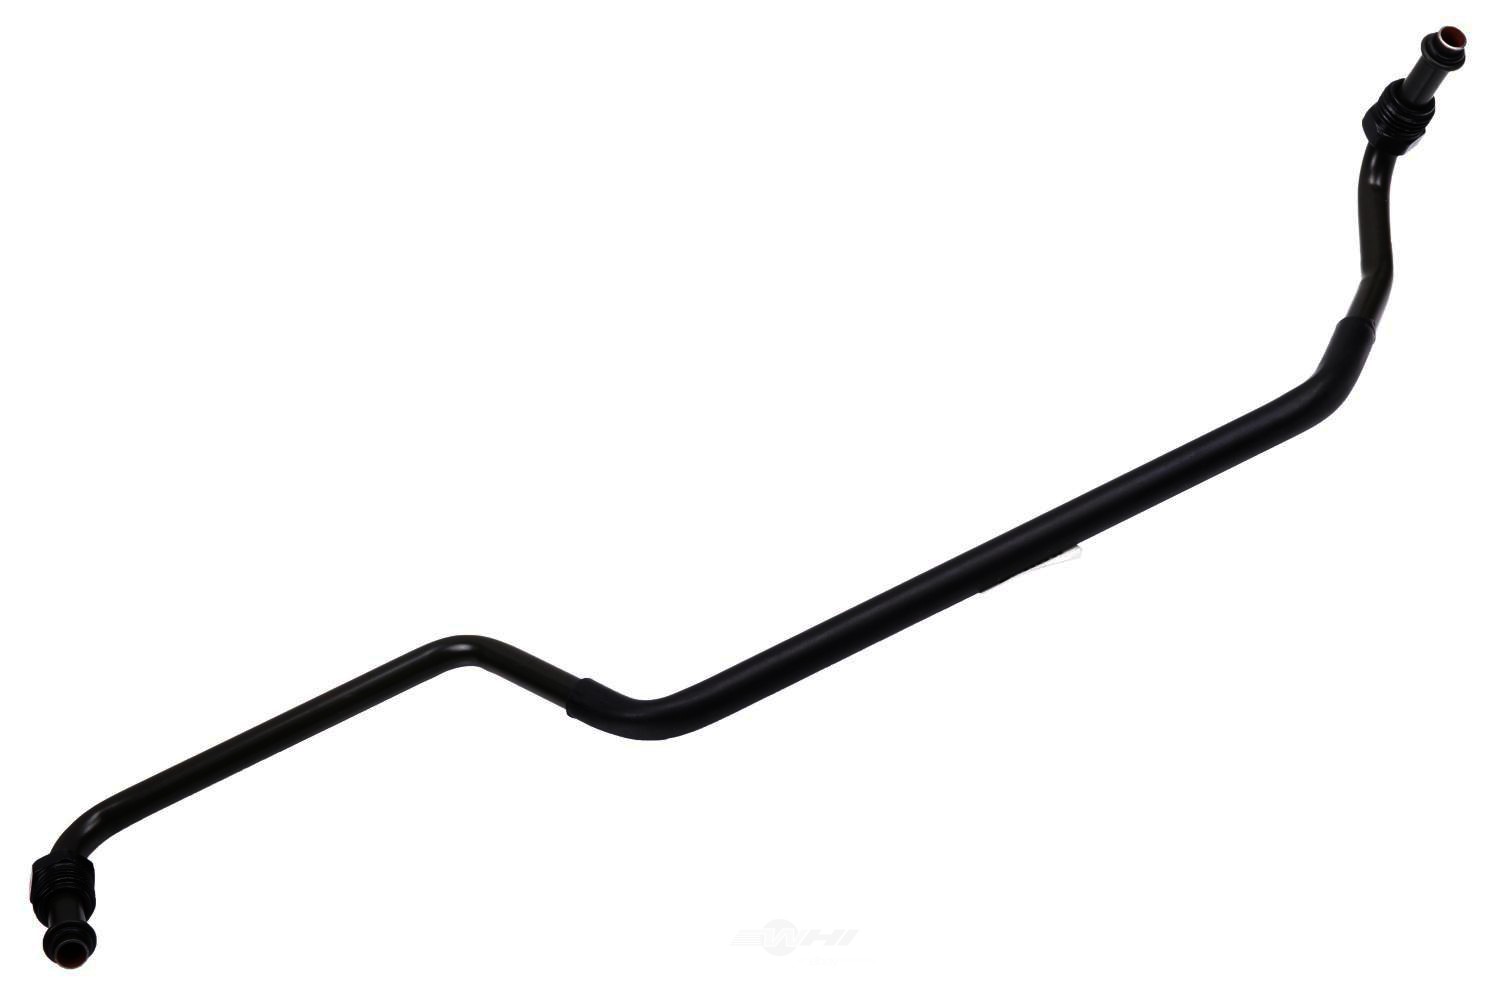 GM GENUINE PARTS - Rack and Pinion Hydraulic Transfer Tubing Assembly - GMP 25904106